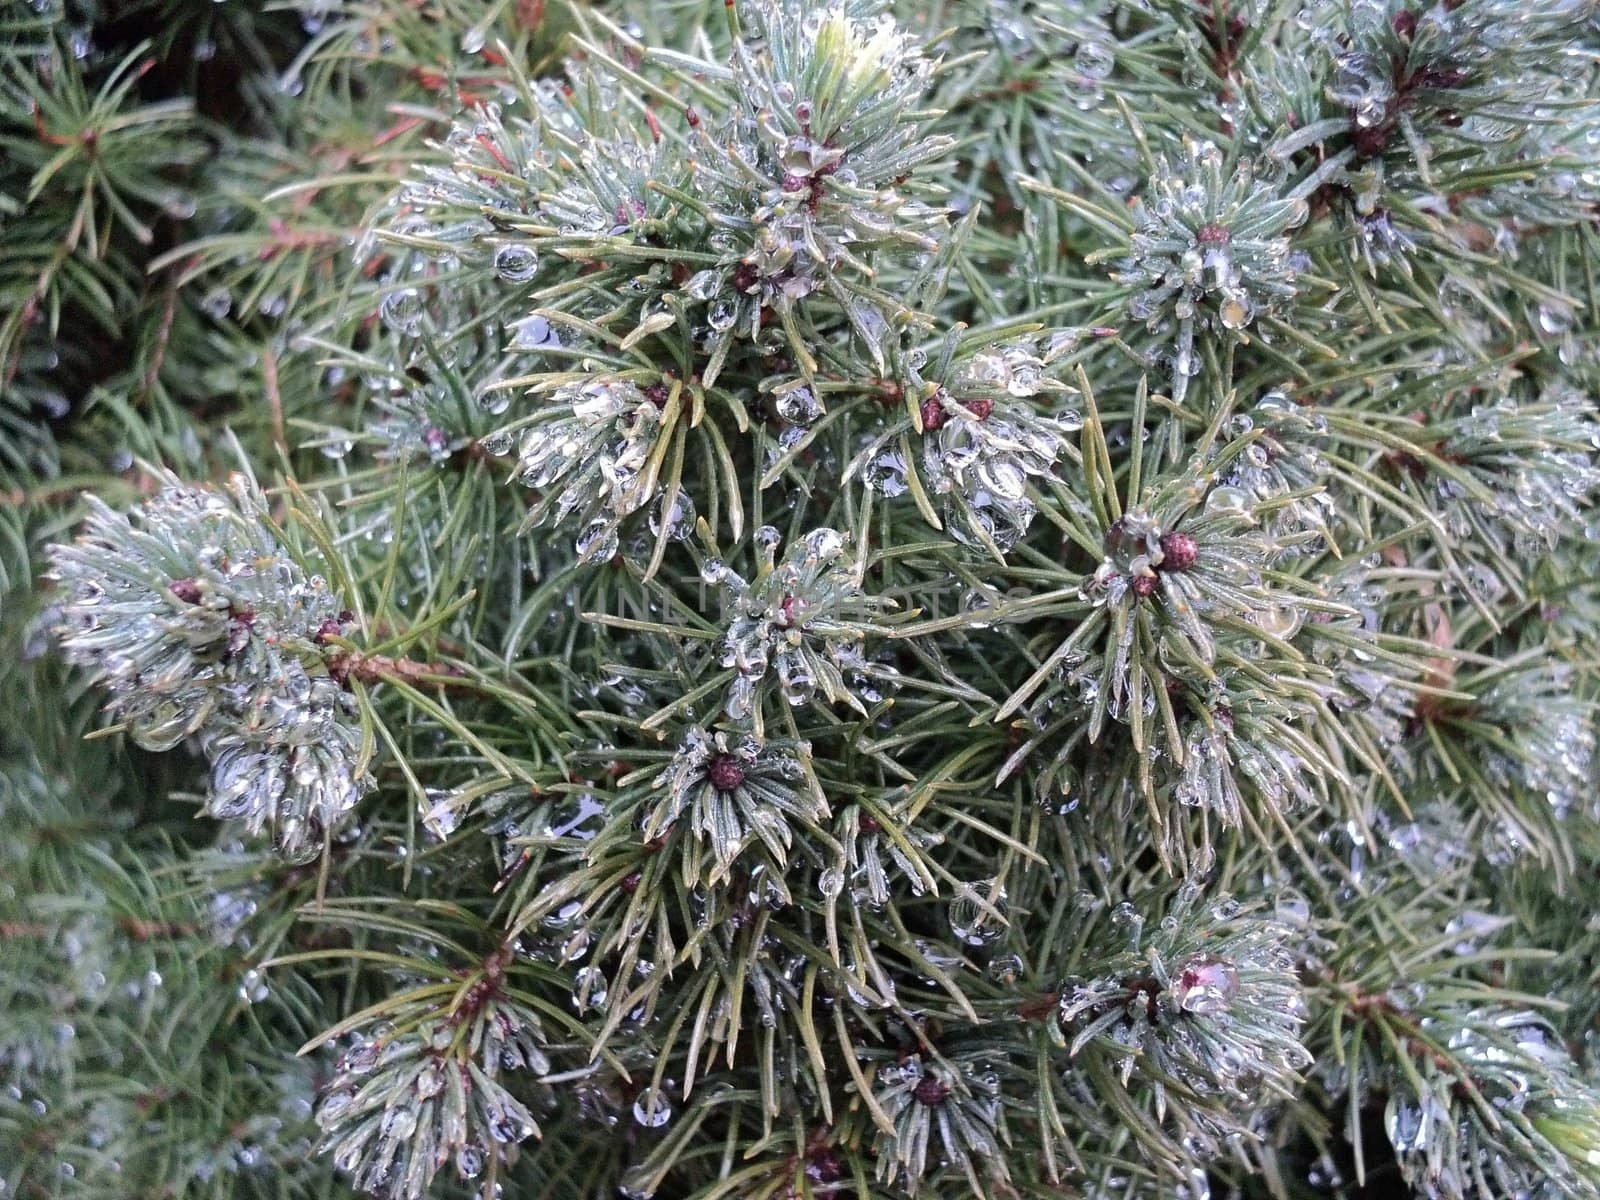 General view of pine branches in rainy weather with water drops on leaves